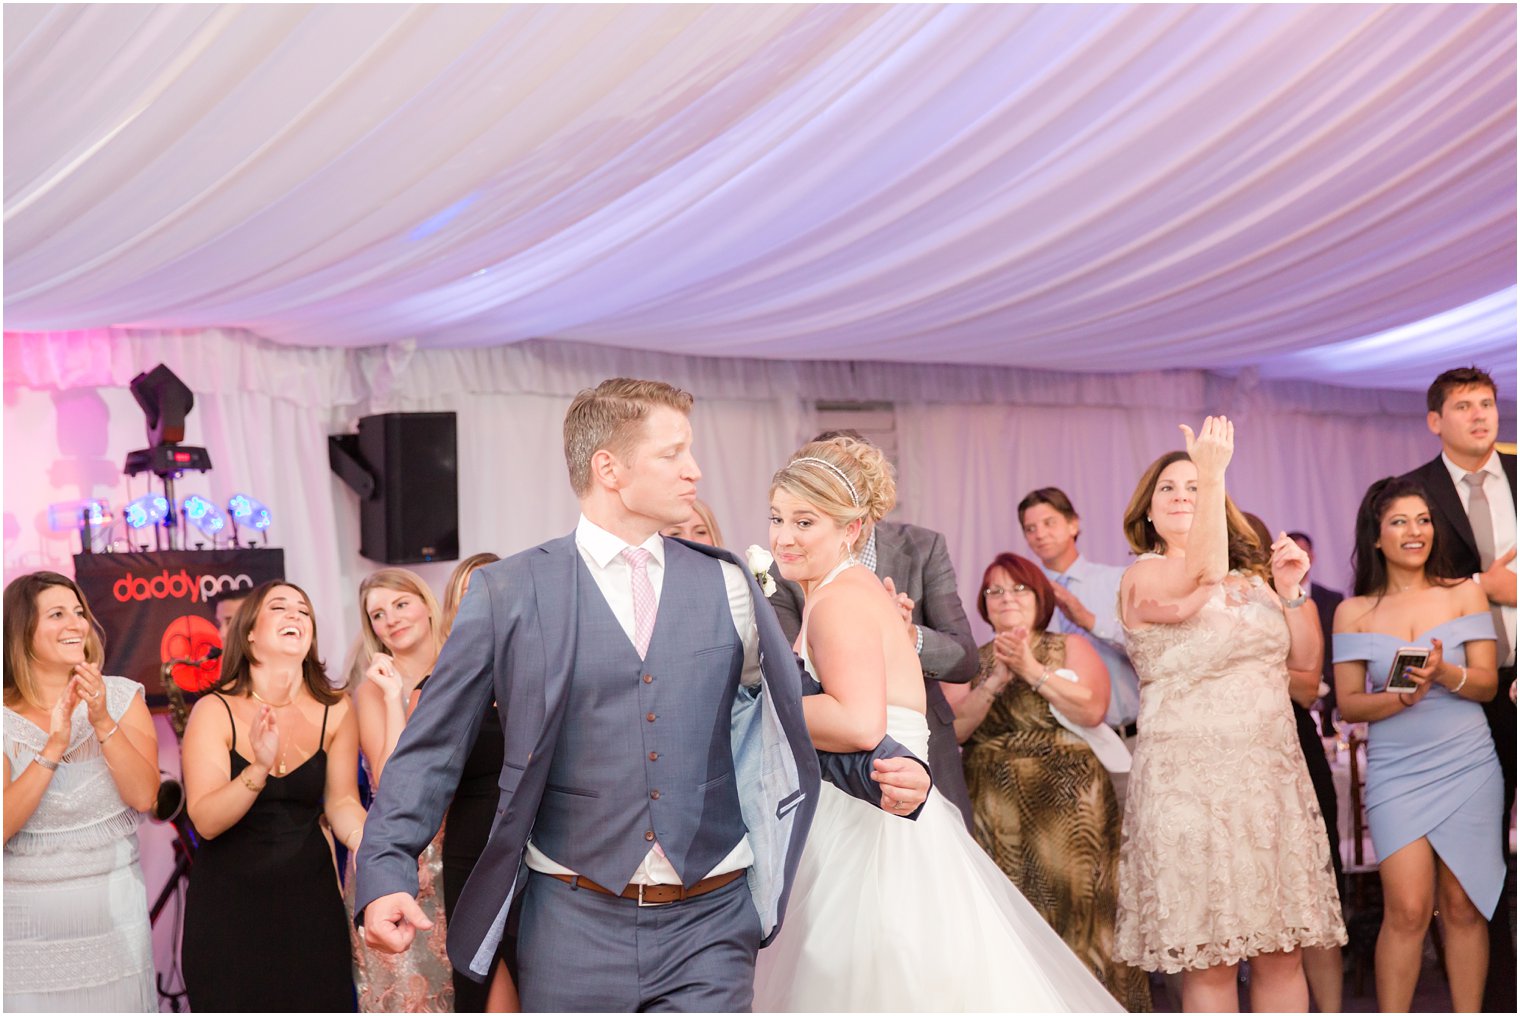 Candid moments at Windows on the Water at Frogbridge tented wedding reception